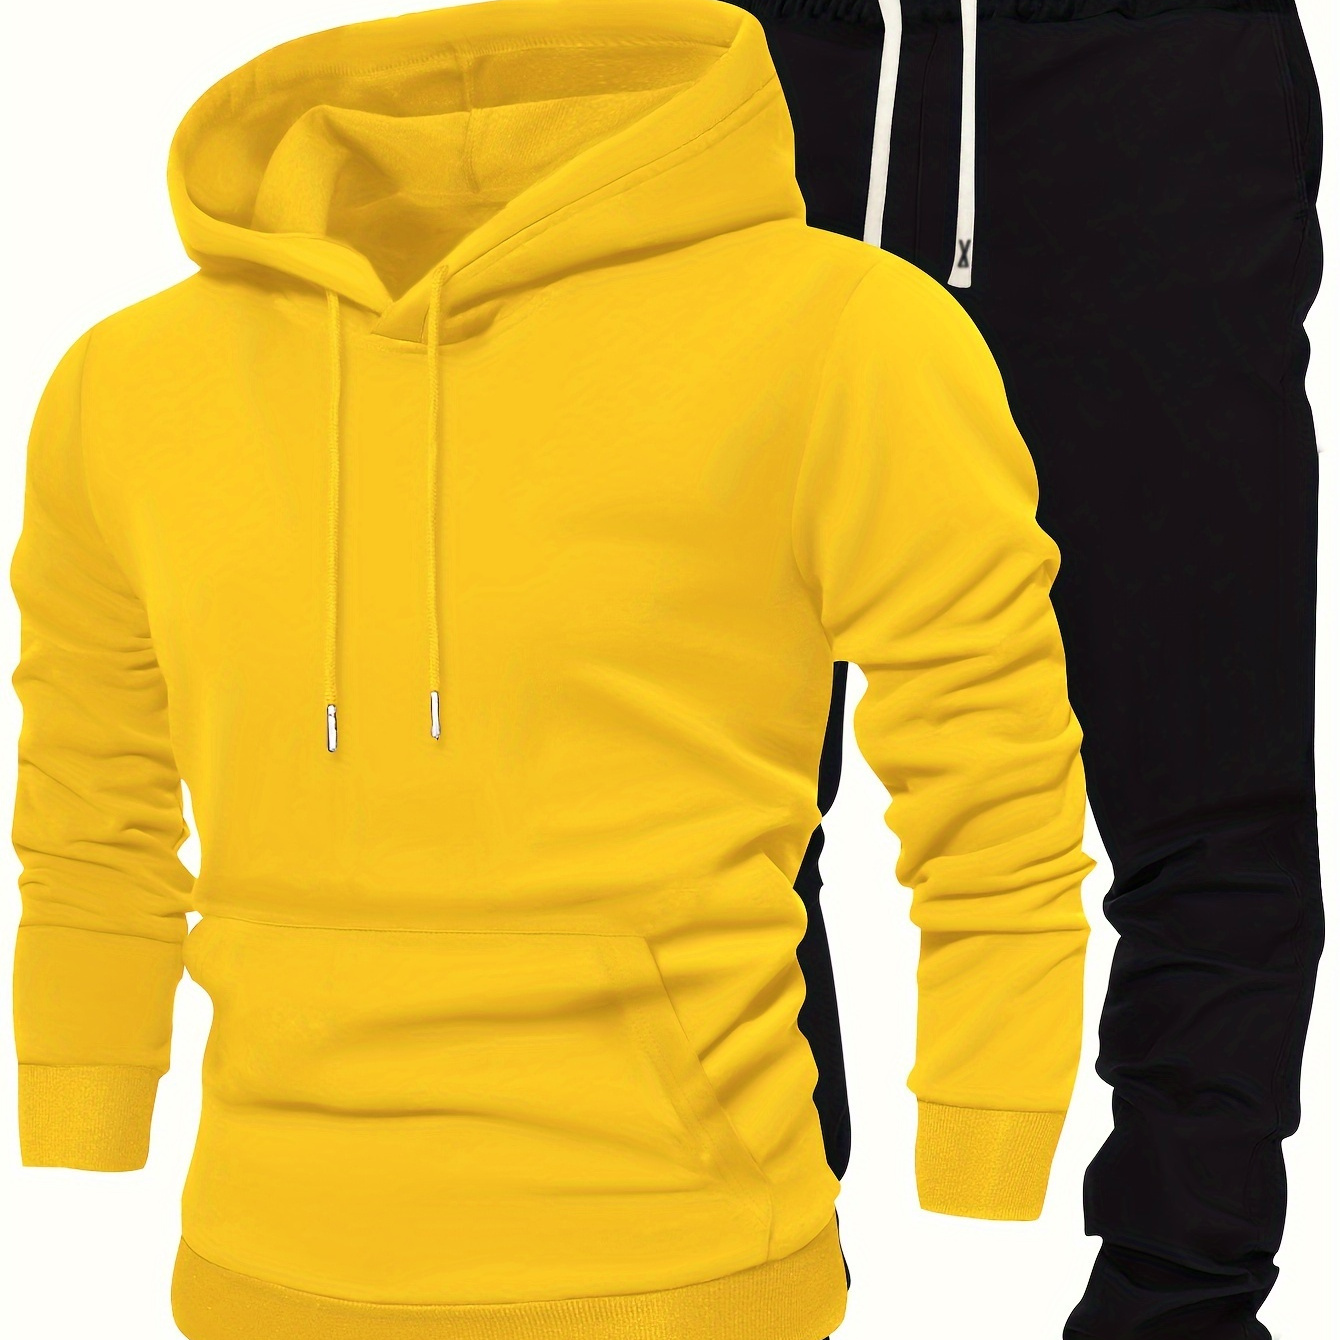 

Men's 2pcs Outfits, Casual Hoodies Long Sleeve Hooded Sweatshirt And Sweatpants Joggers Set For Winter Fall, Men's Clothing